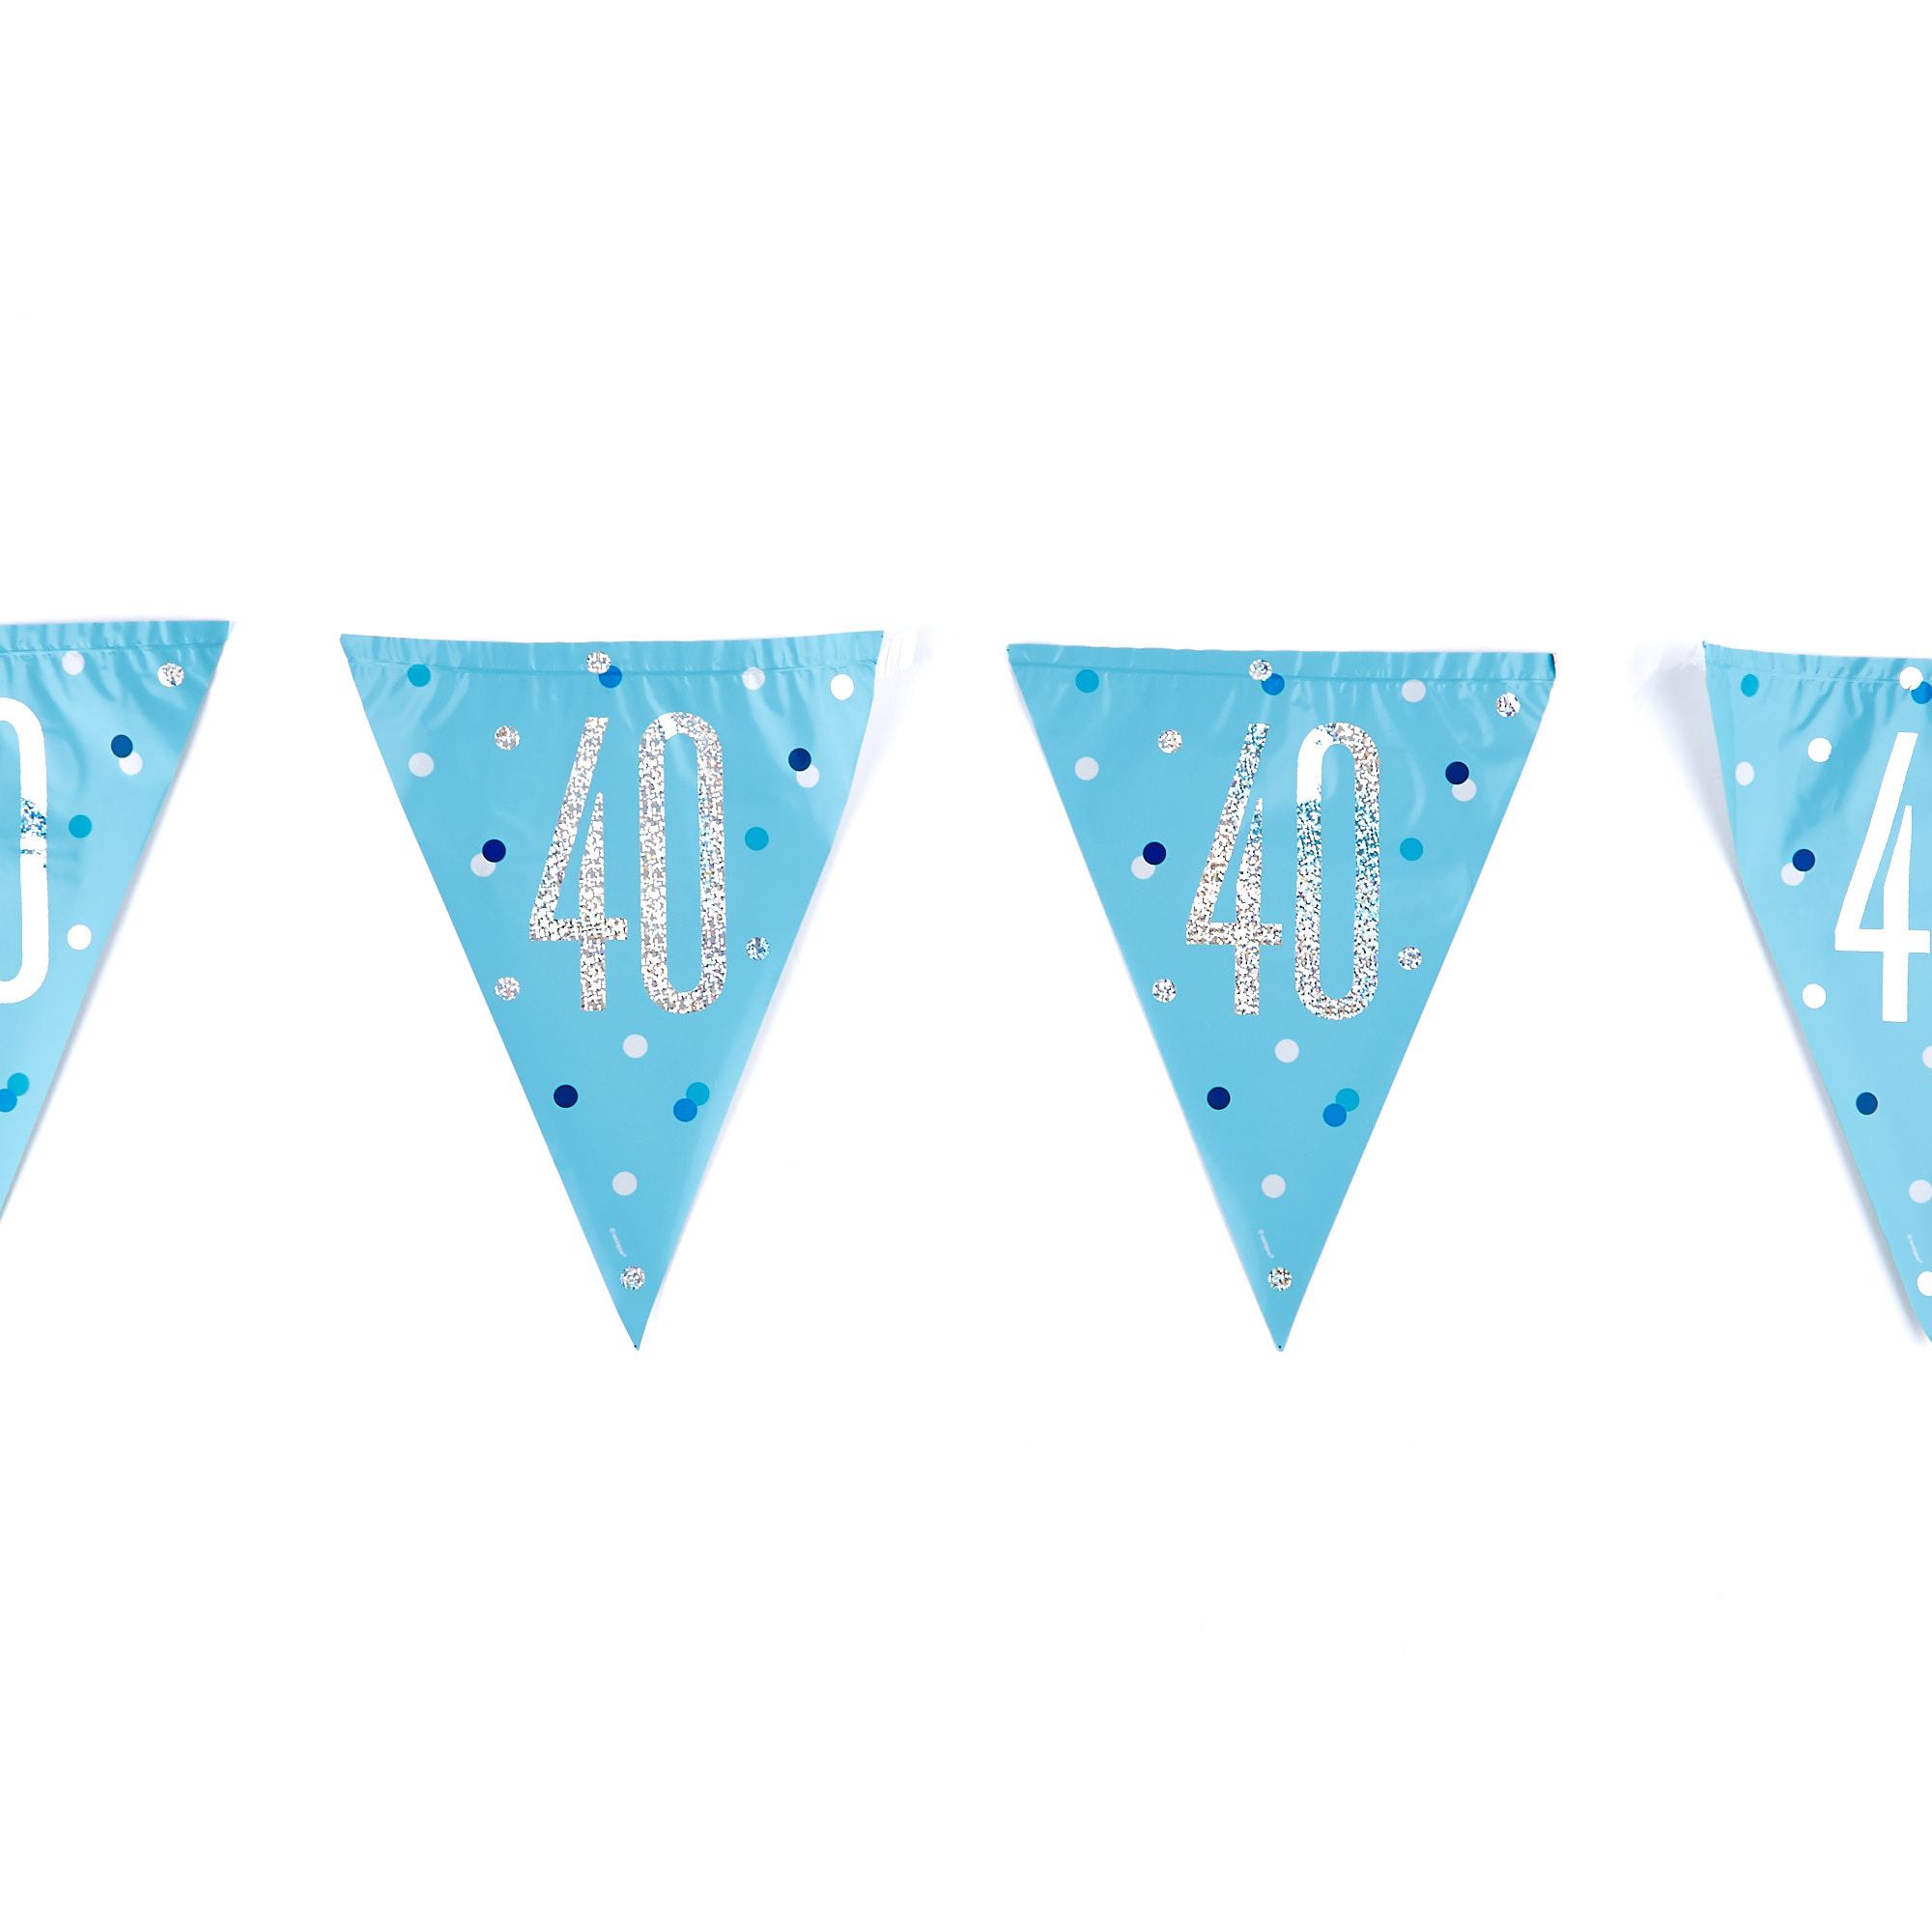 Blue 40th Birthday Party Tableware & Decorations Bundle -  16 Guests